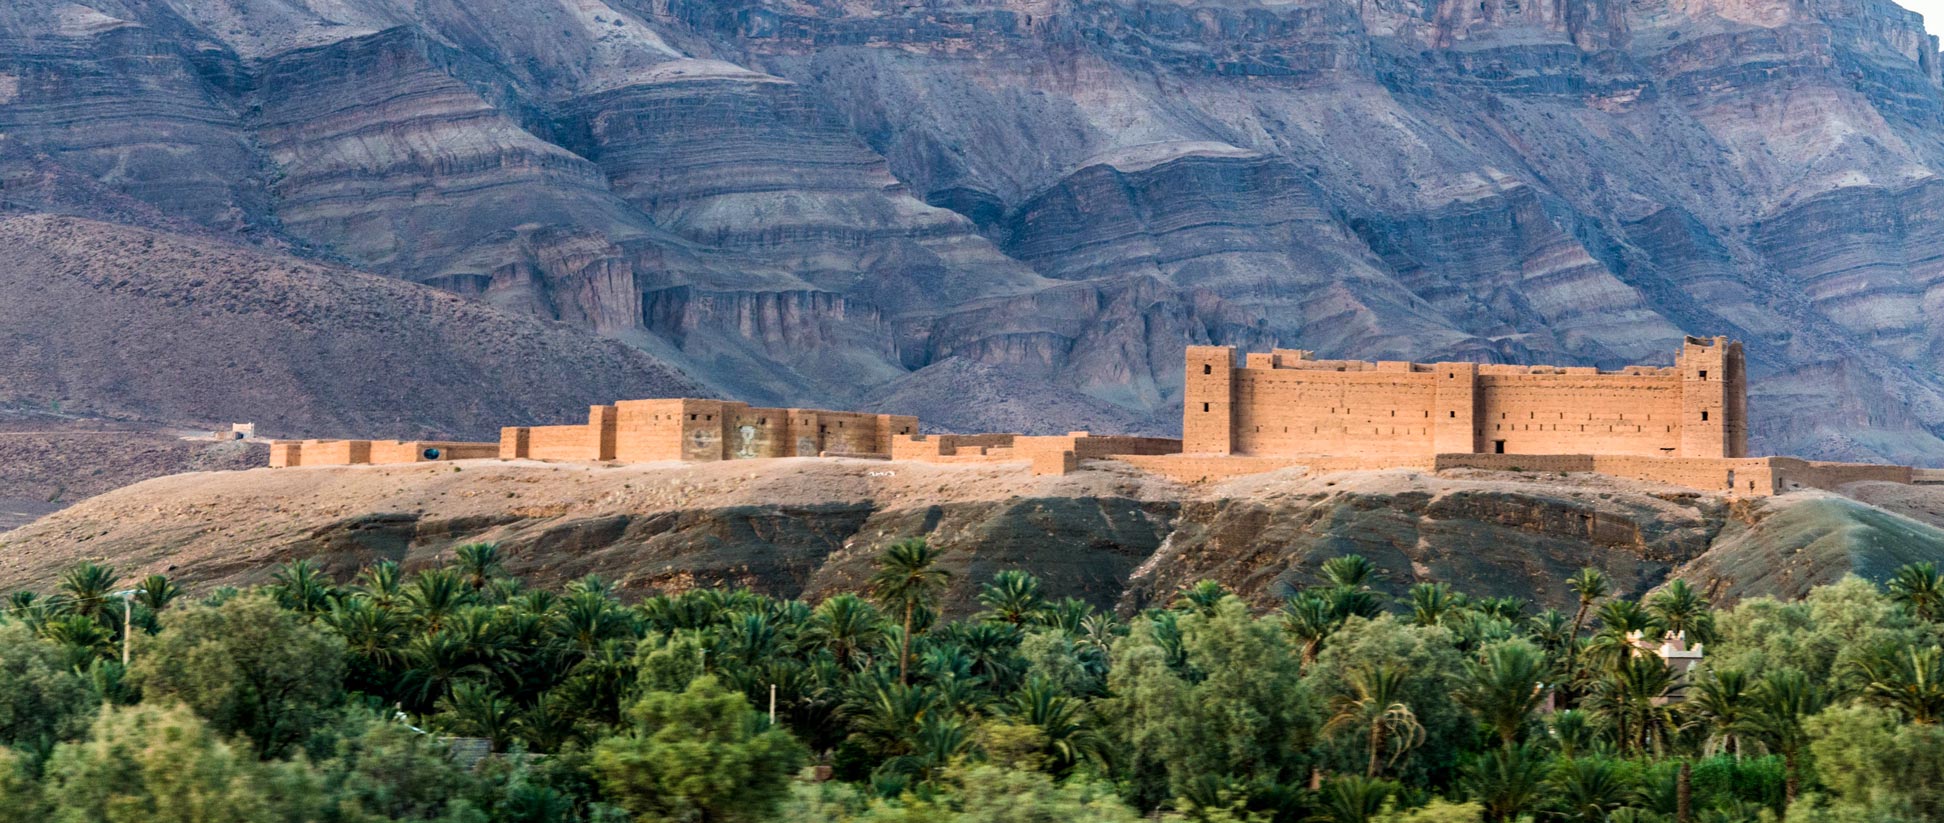 The kasbah of Tamnougalt is surrounded by palm trees of an oasis in the Atlas Mountains